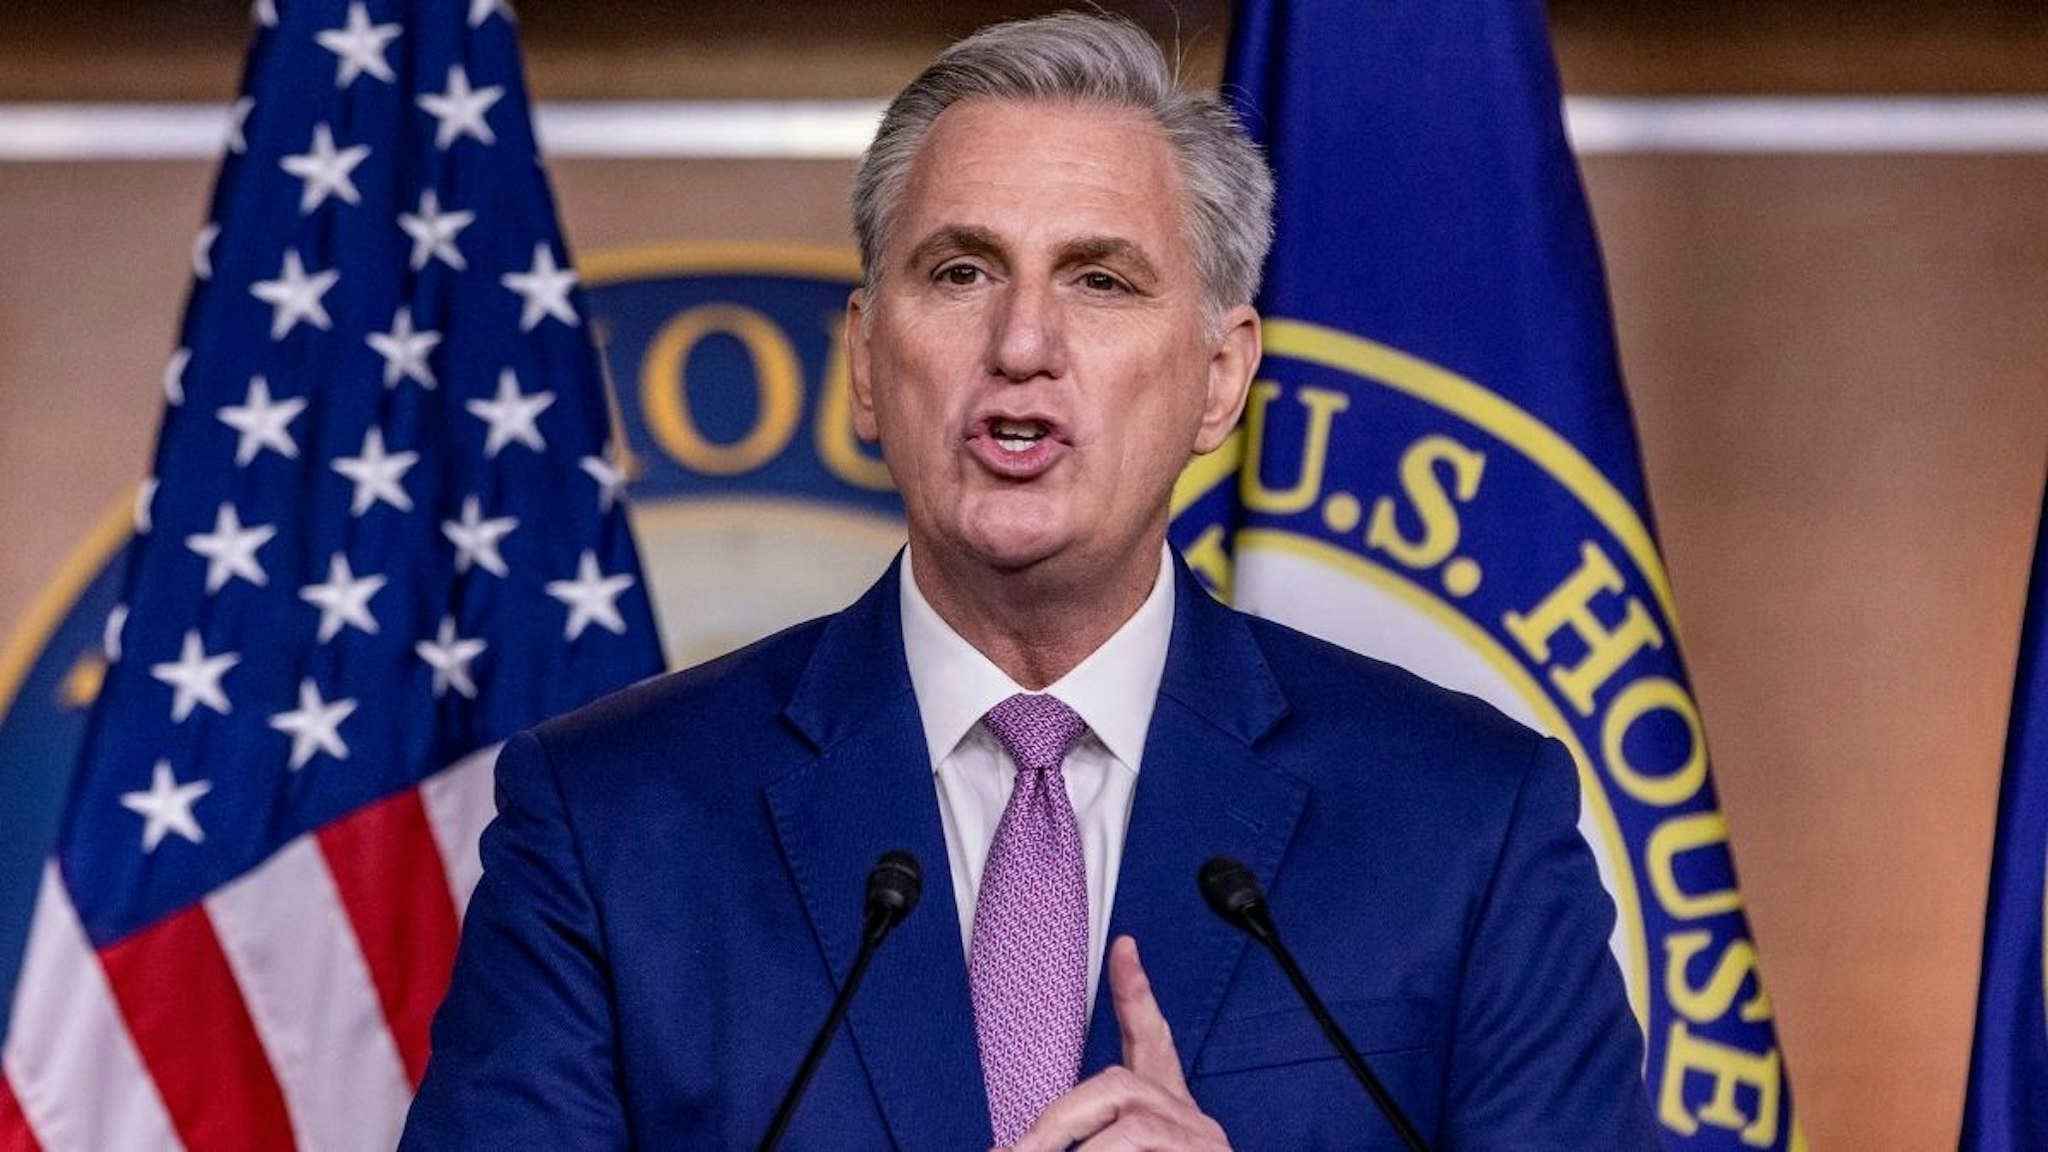 House Minority Leader Kevin McCarthy (R-CA) holds his weekly news conference at the U.S. Capitol on March 09, 2022 in Washington, DC.